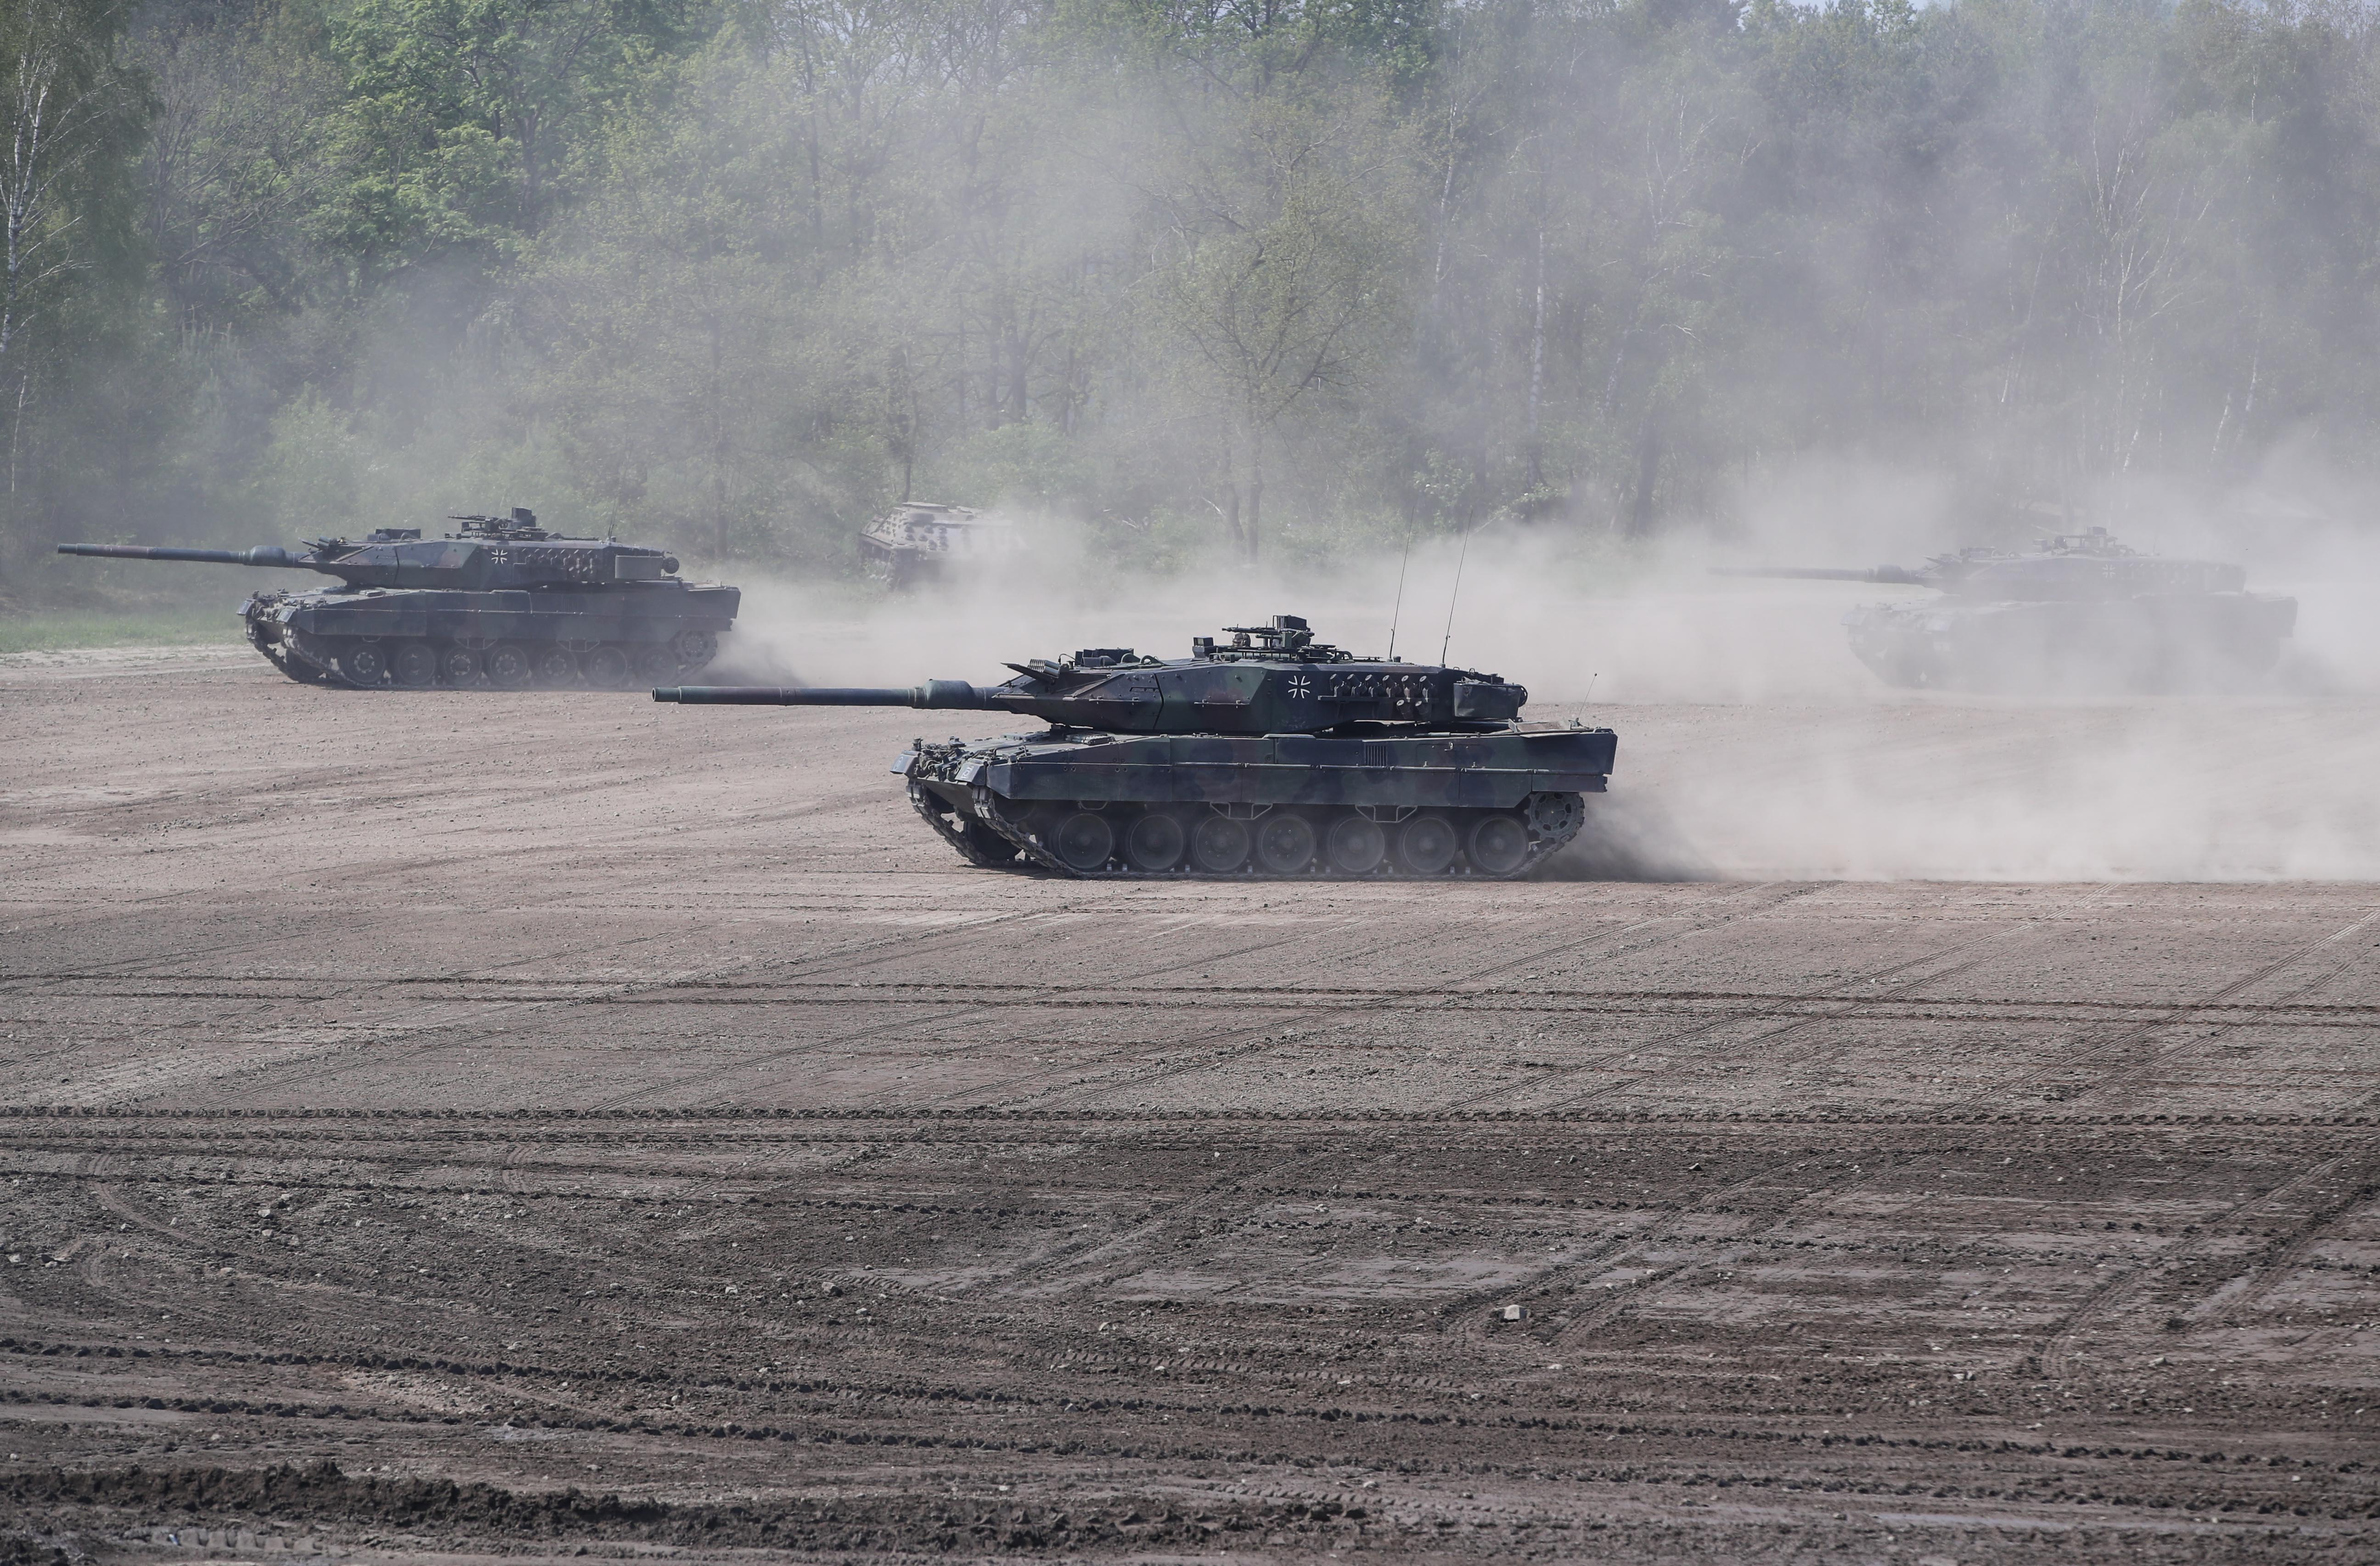 Leopard 2 tanks are seen in a training demonstration in Munster, Germany, May 20, 2019.